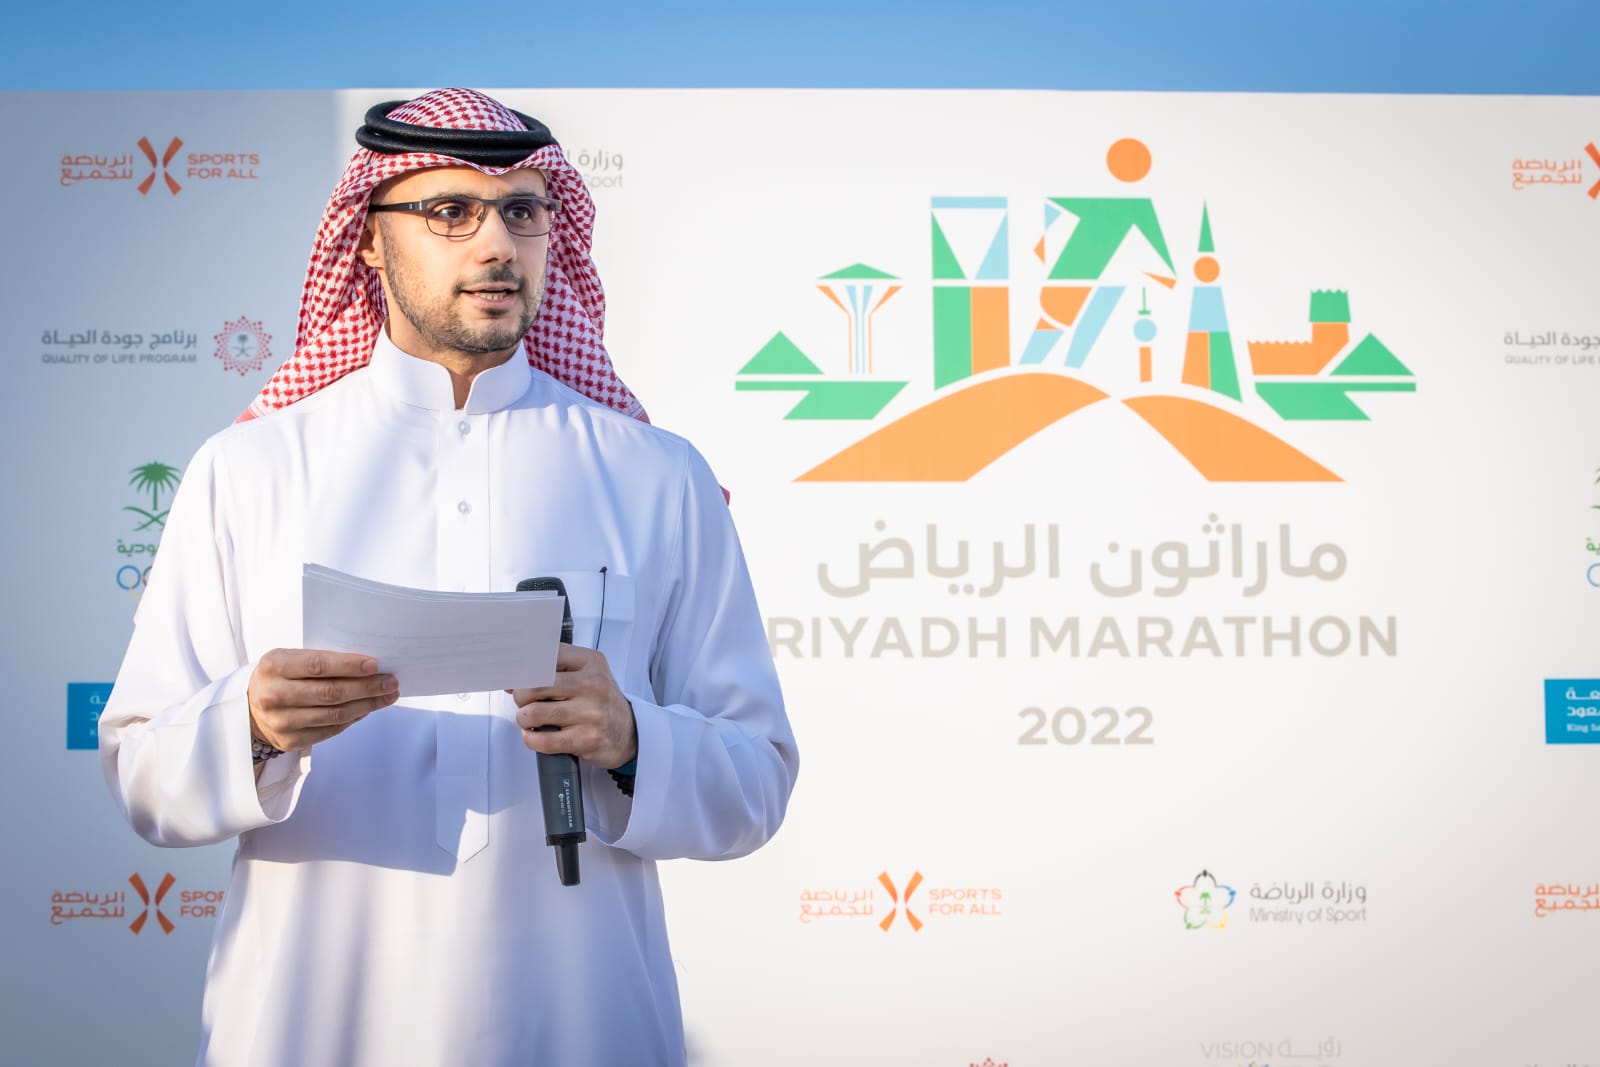 Saudi Arabia’s first full marathon officially launched